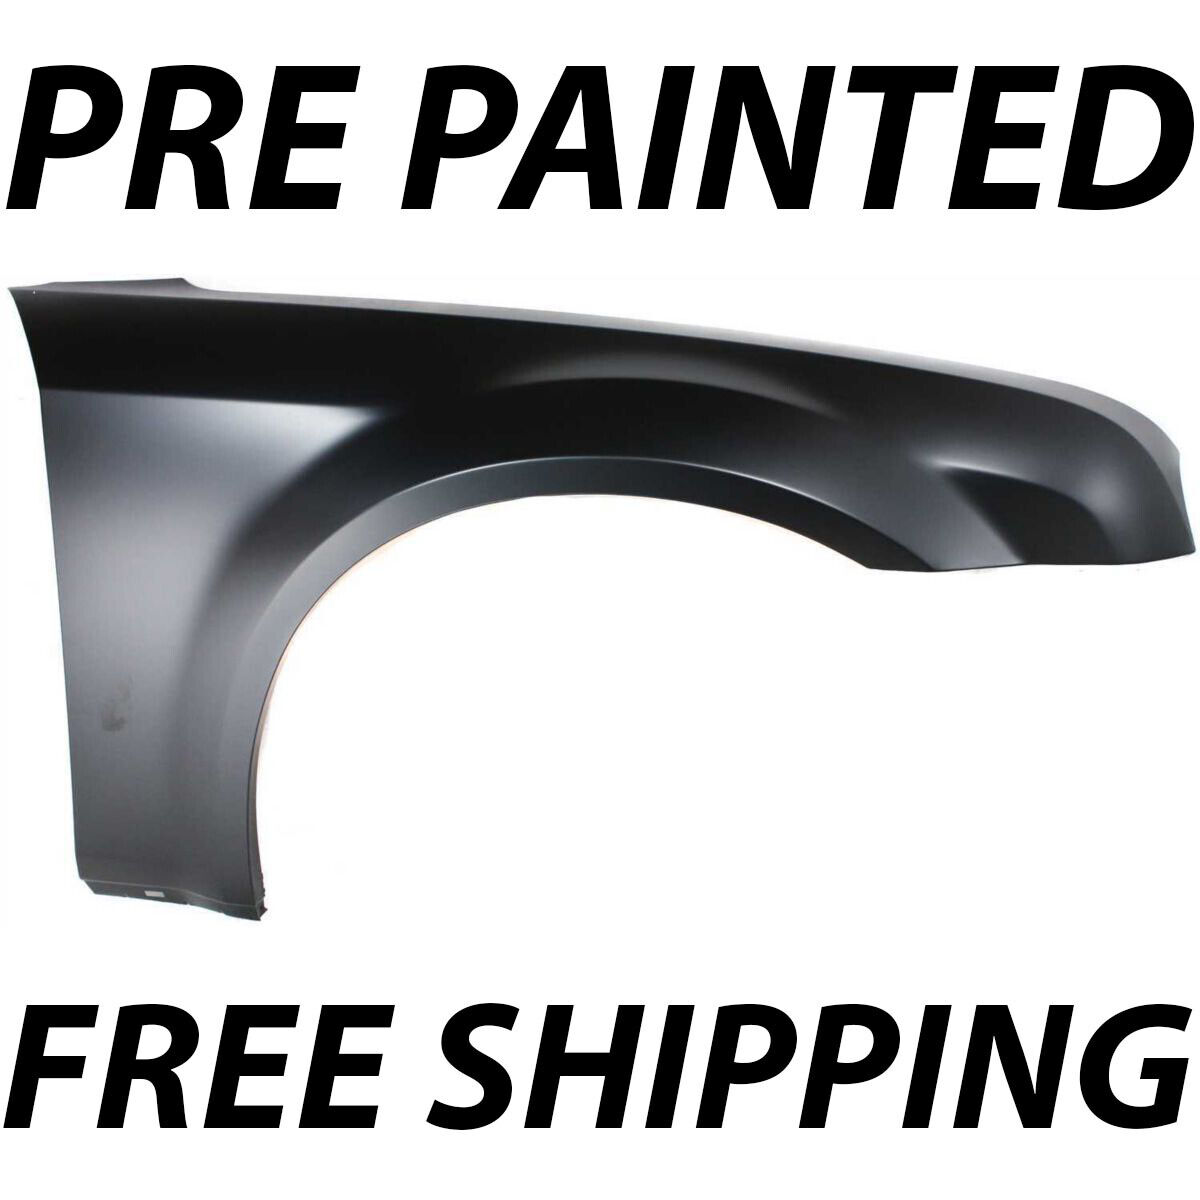 NEW Painted To Match - Passengers Front Right Fender for 2005-2010 Chrysler 300